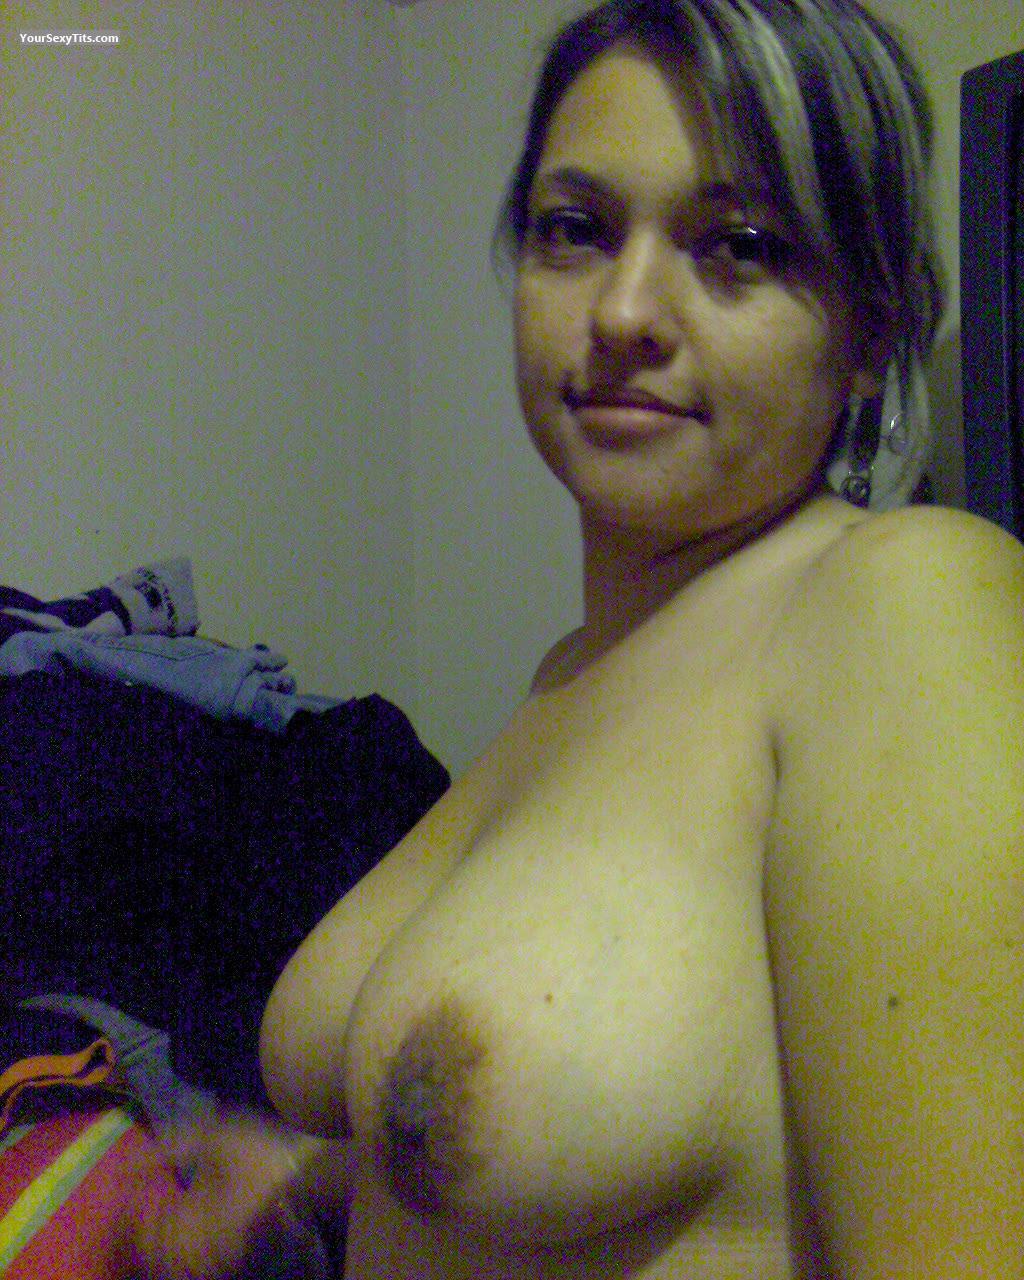 Big Tits My Wife Becky